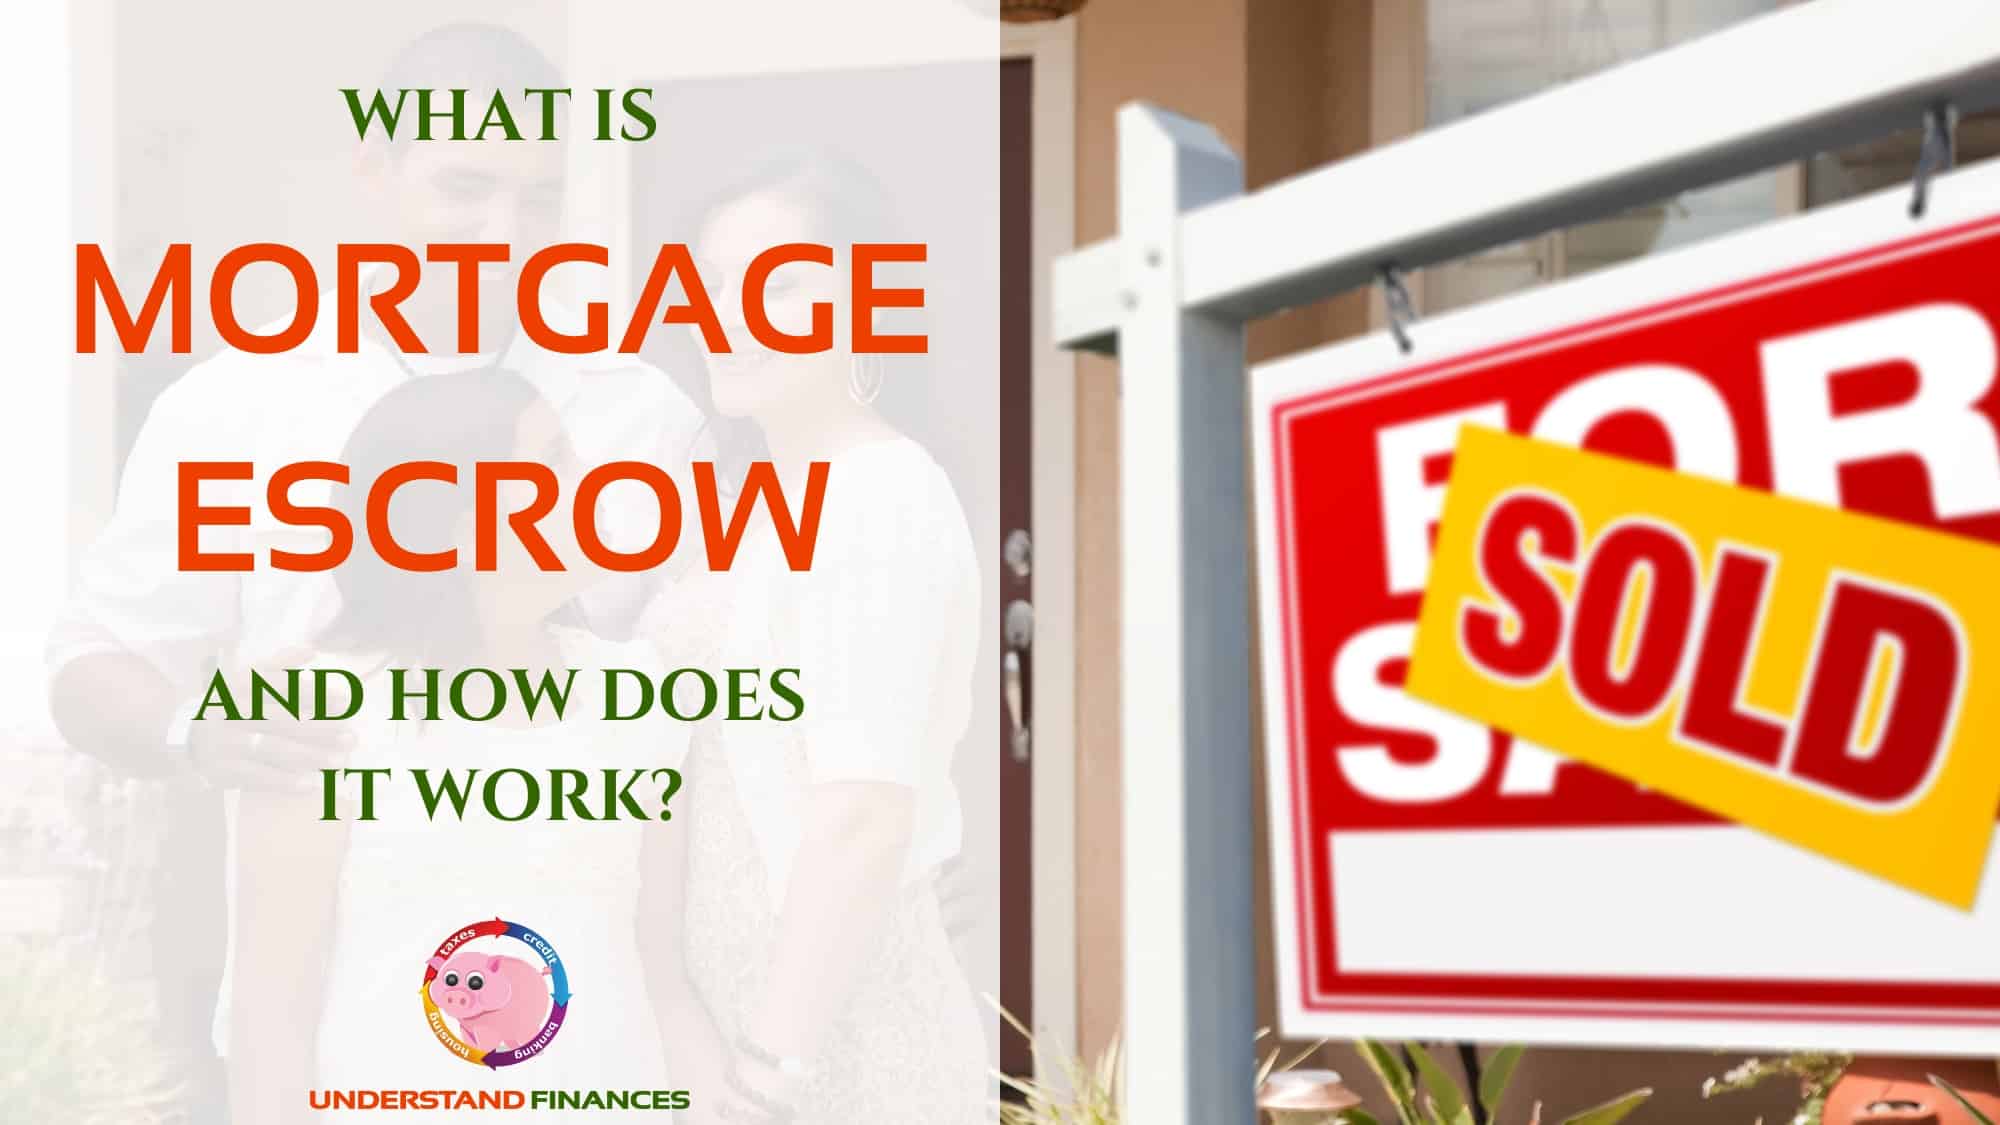 What Is Mortgage Escrow & How Does It Work?